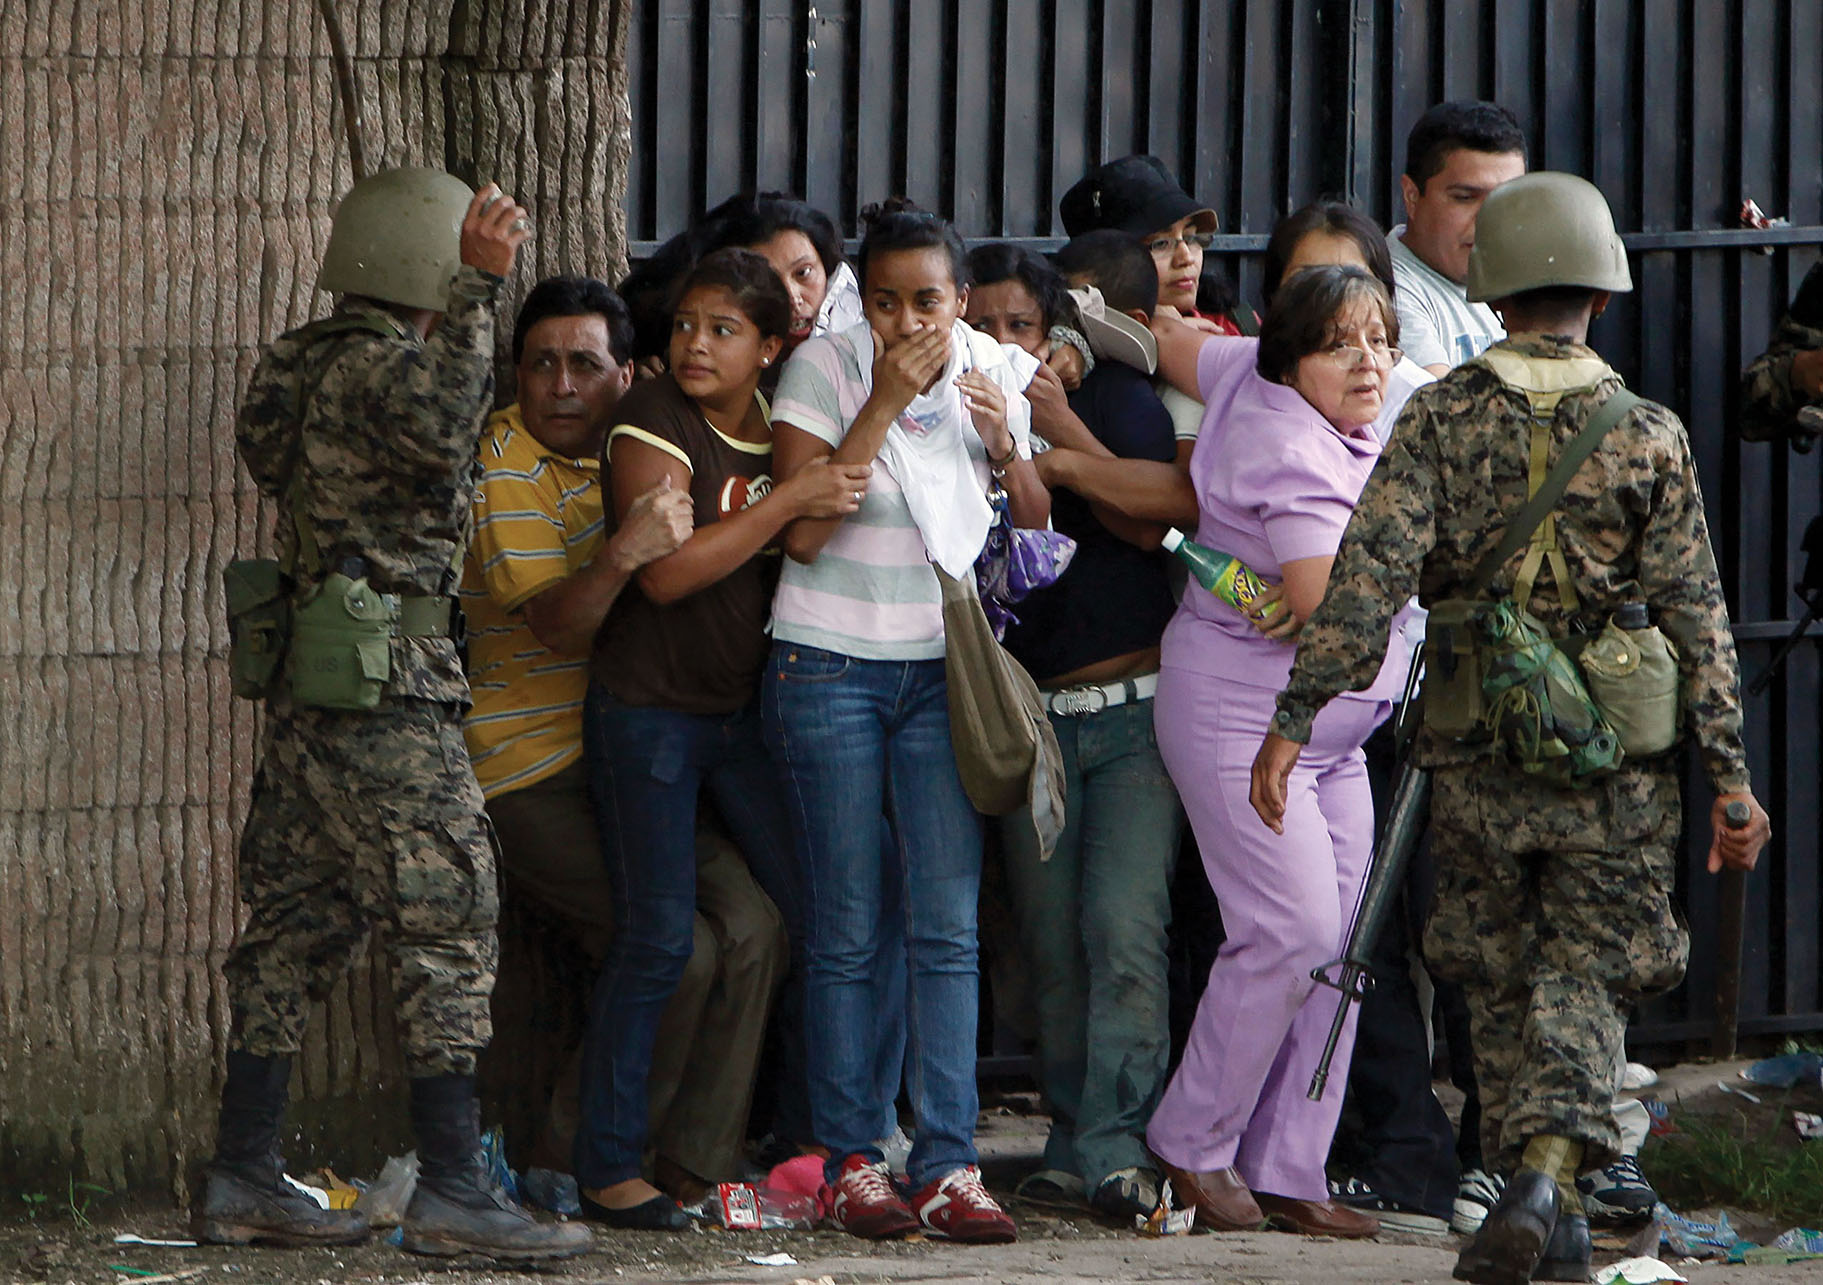 Honduran army soldiers surround supporters of ousted President Manuel Zelaya during the coup in Tegucigalpa, June 2009. (Photo by Eduardo Verdugo/AP Photo.)